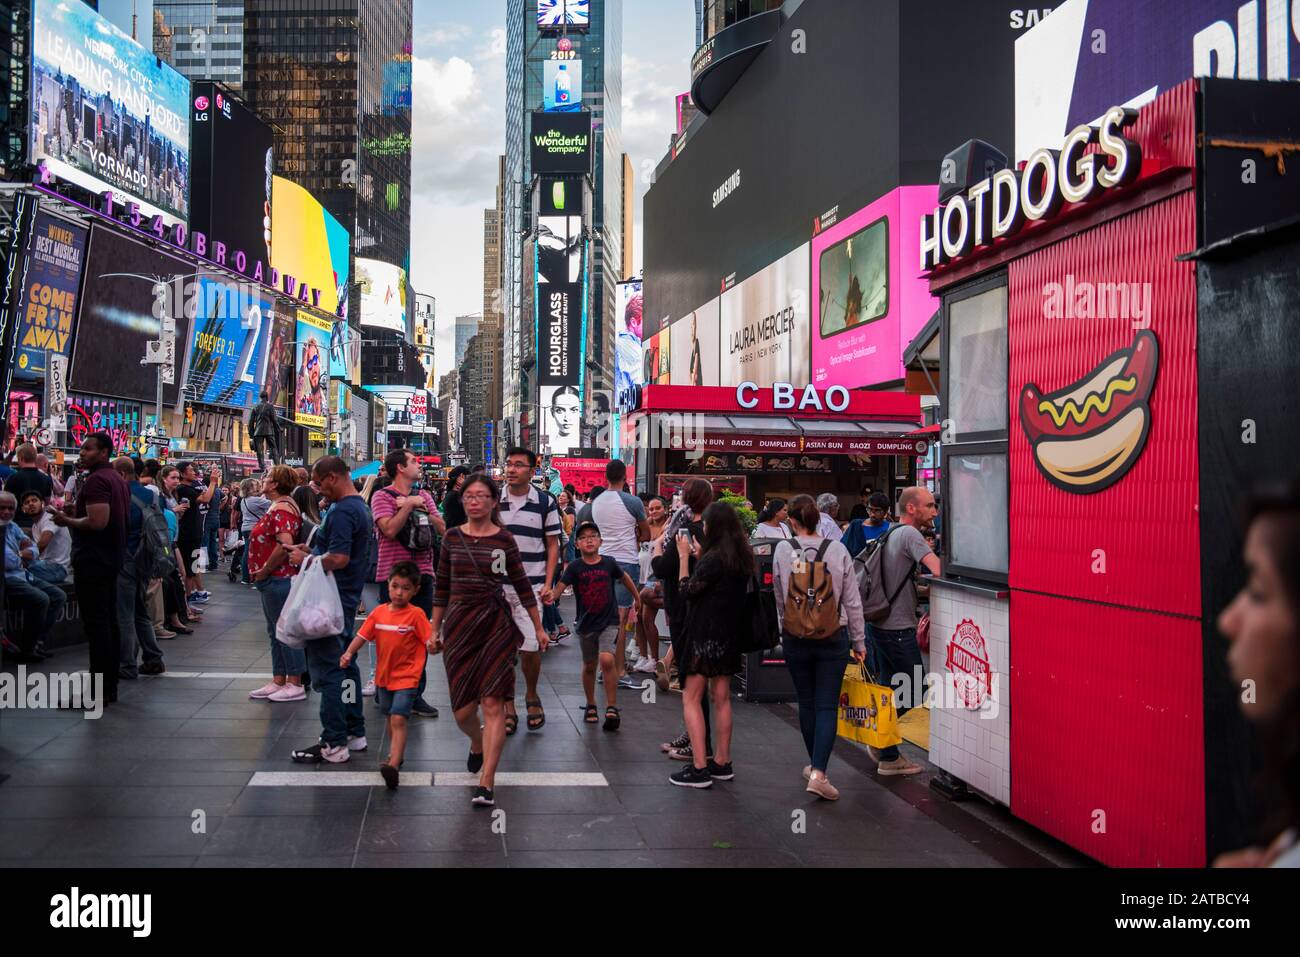 New York City, New York - August 24, 2019: Times Square, NYC Stock Photo